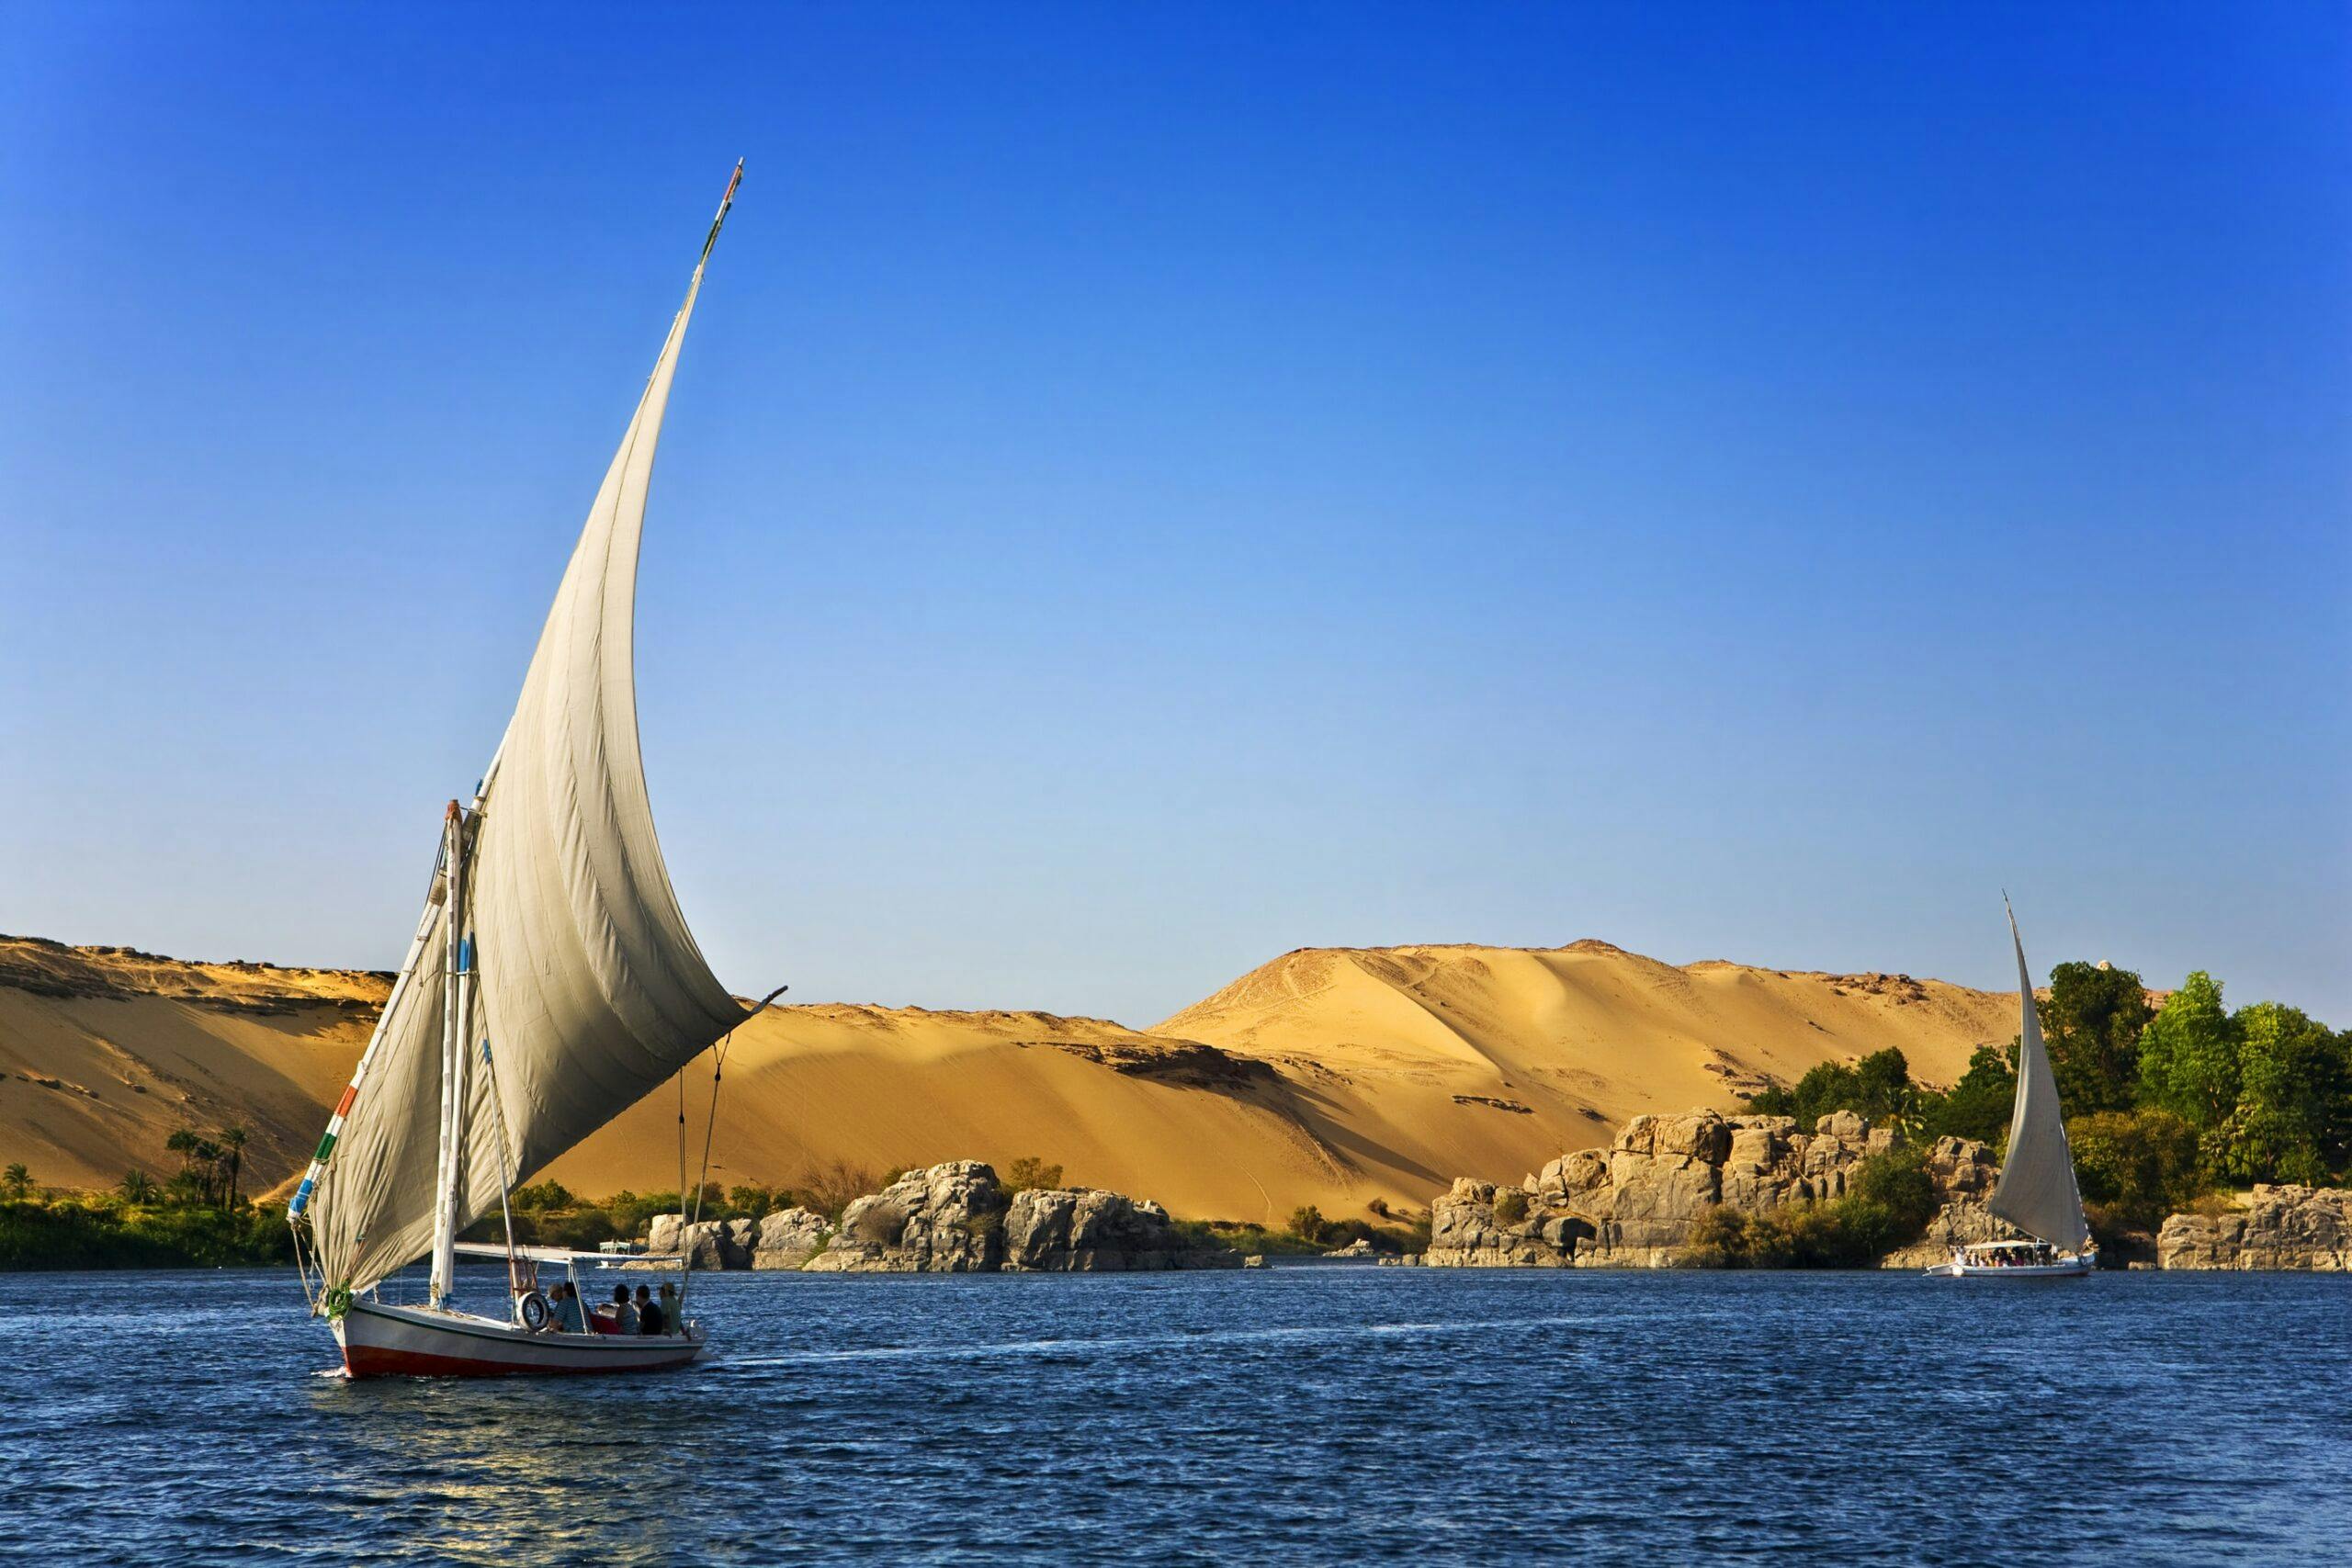 We're reimagining a fairer way to visit Egypt